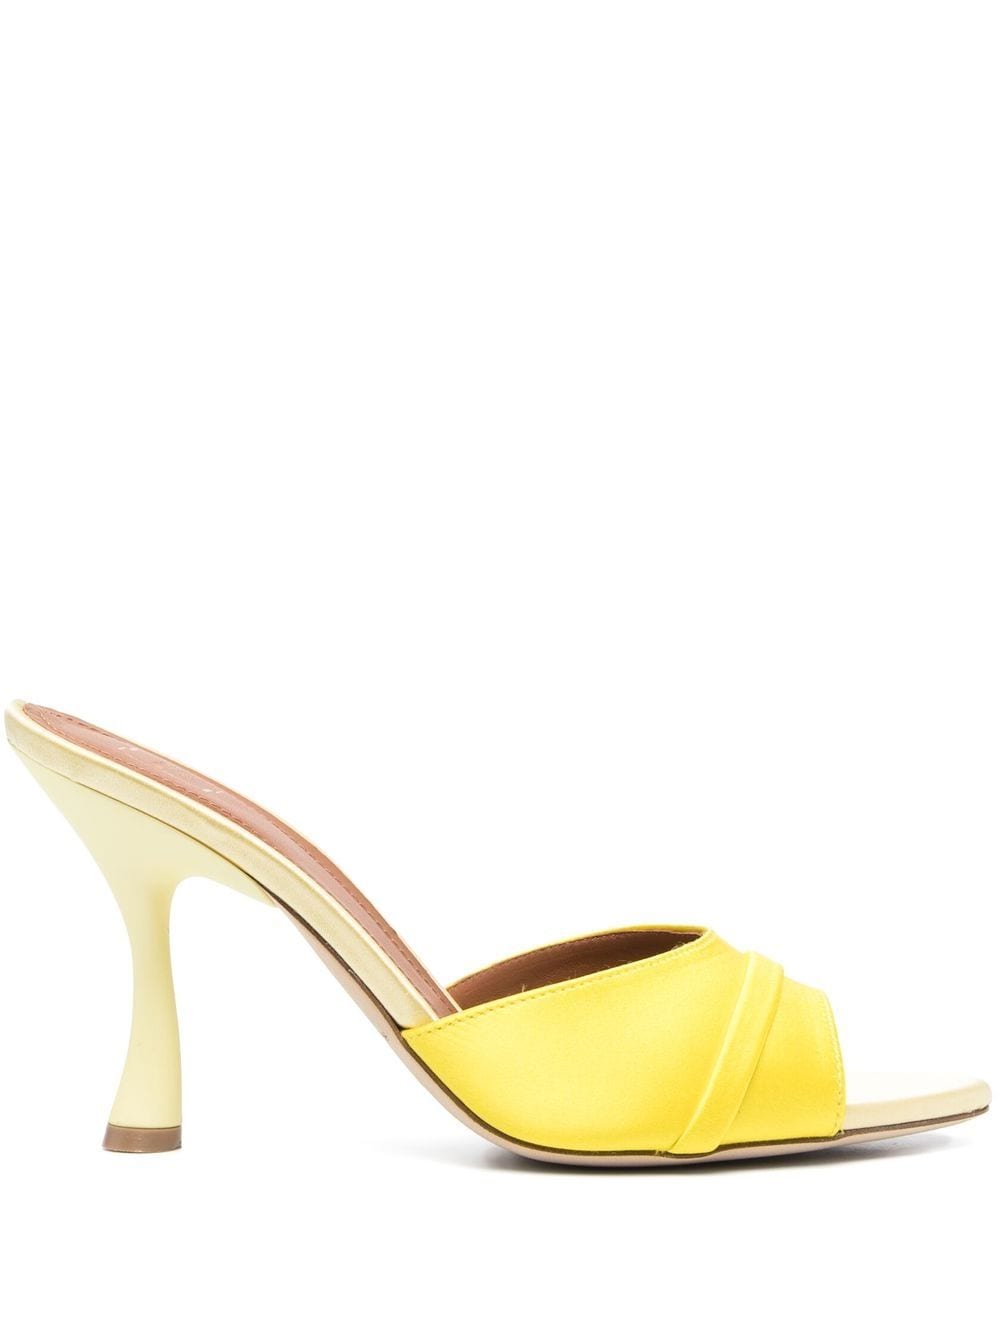 Malone Souliers 95mm sculpted heeled mules - Yellow von Malone Souliers